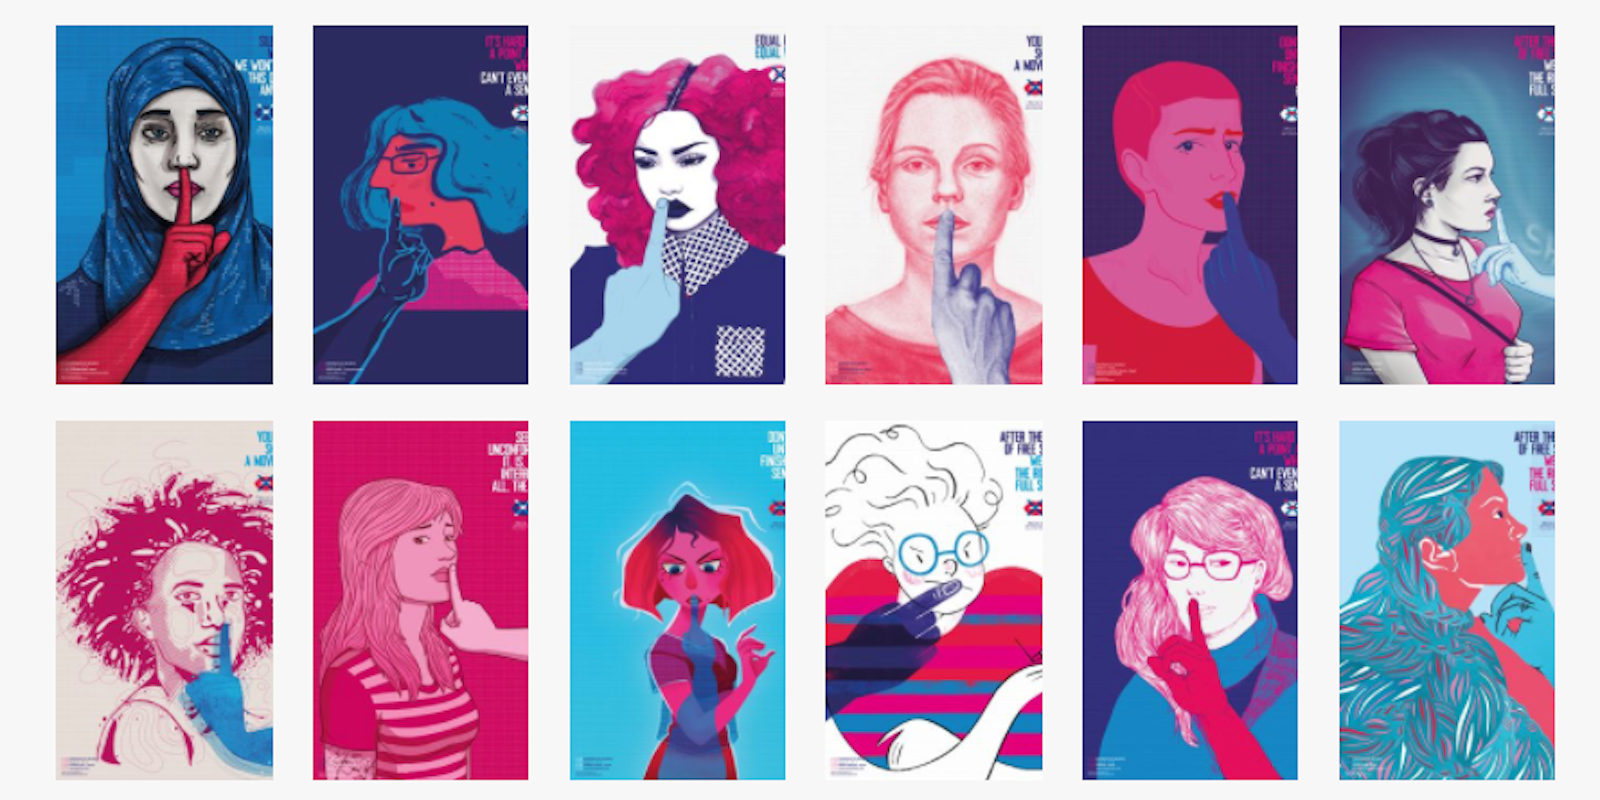 Illustrations of women making the Shh sign